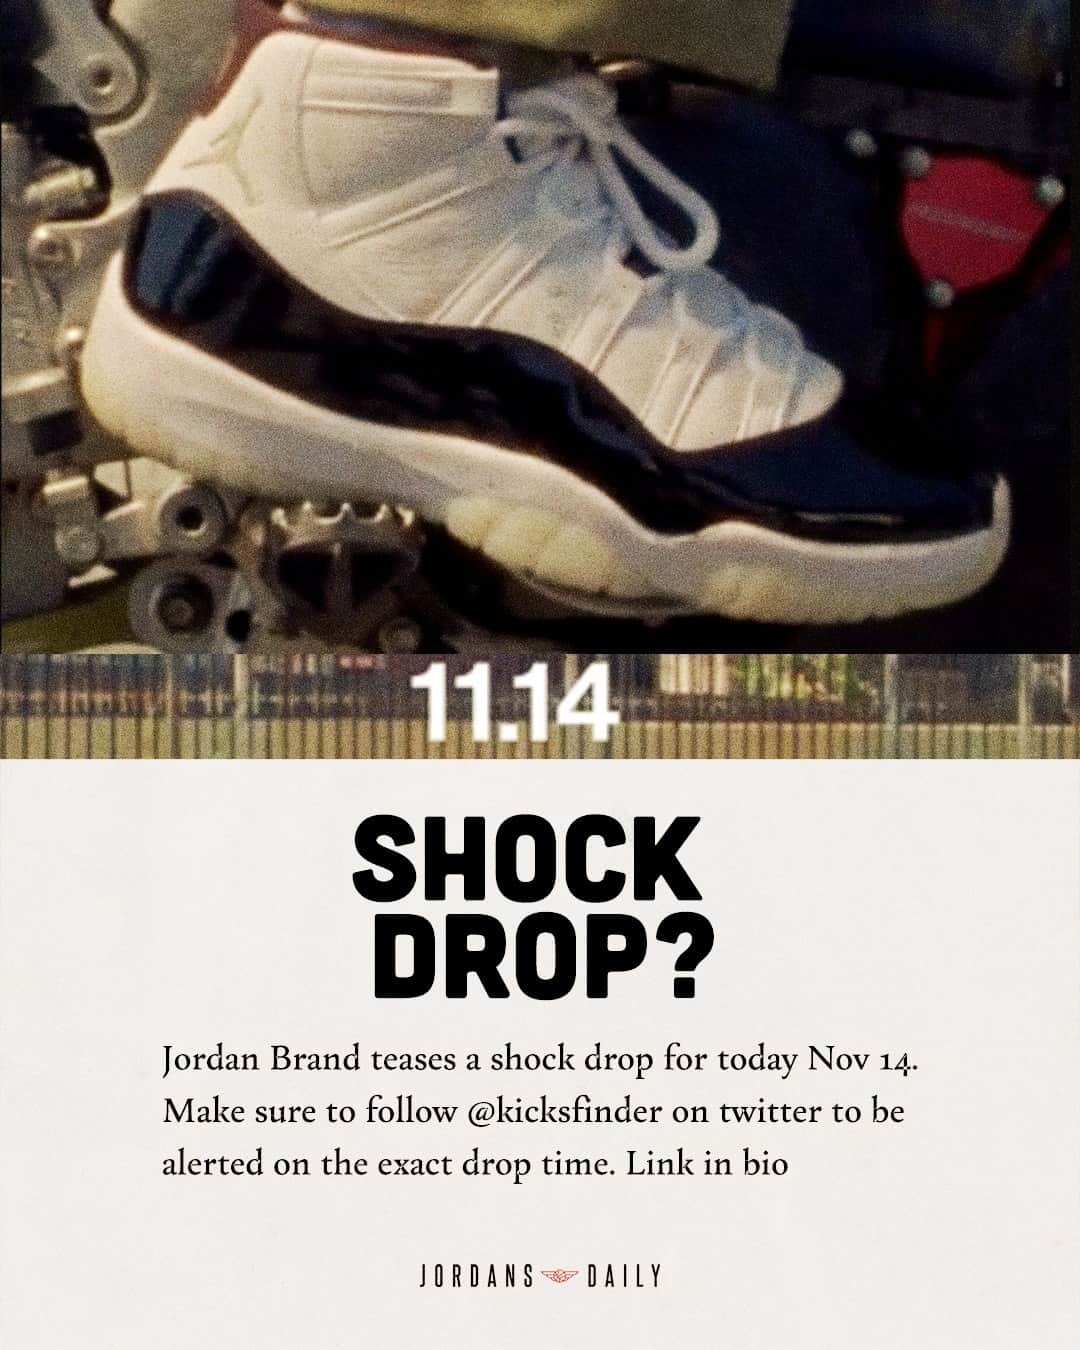 Sneaker News x Jordans Dailyのインスタグラム：「Shock Drop expected today. Don't sleep if you are looking to cop. Follow kicksfinder on twitter to be alerted. Link in bio.」